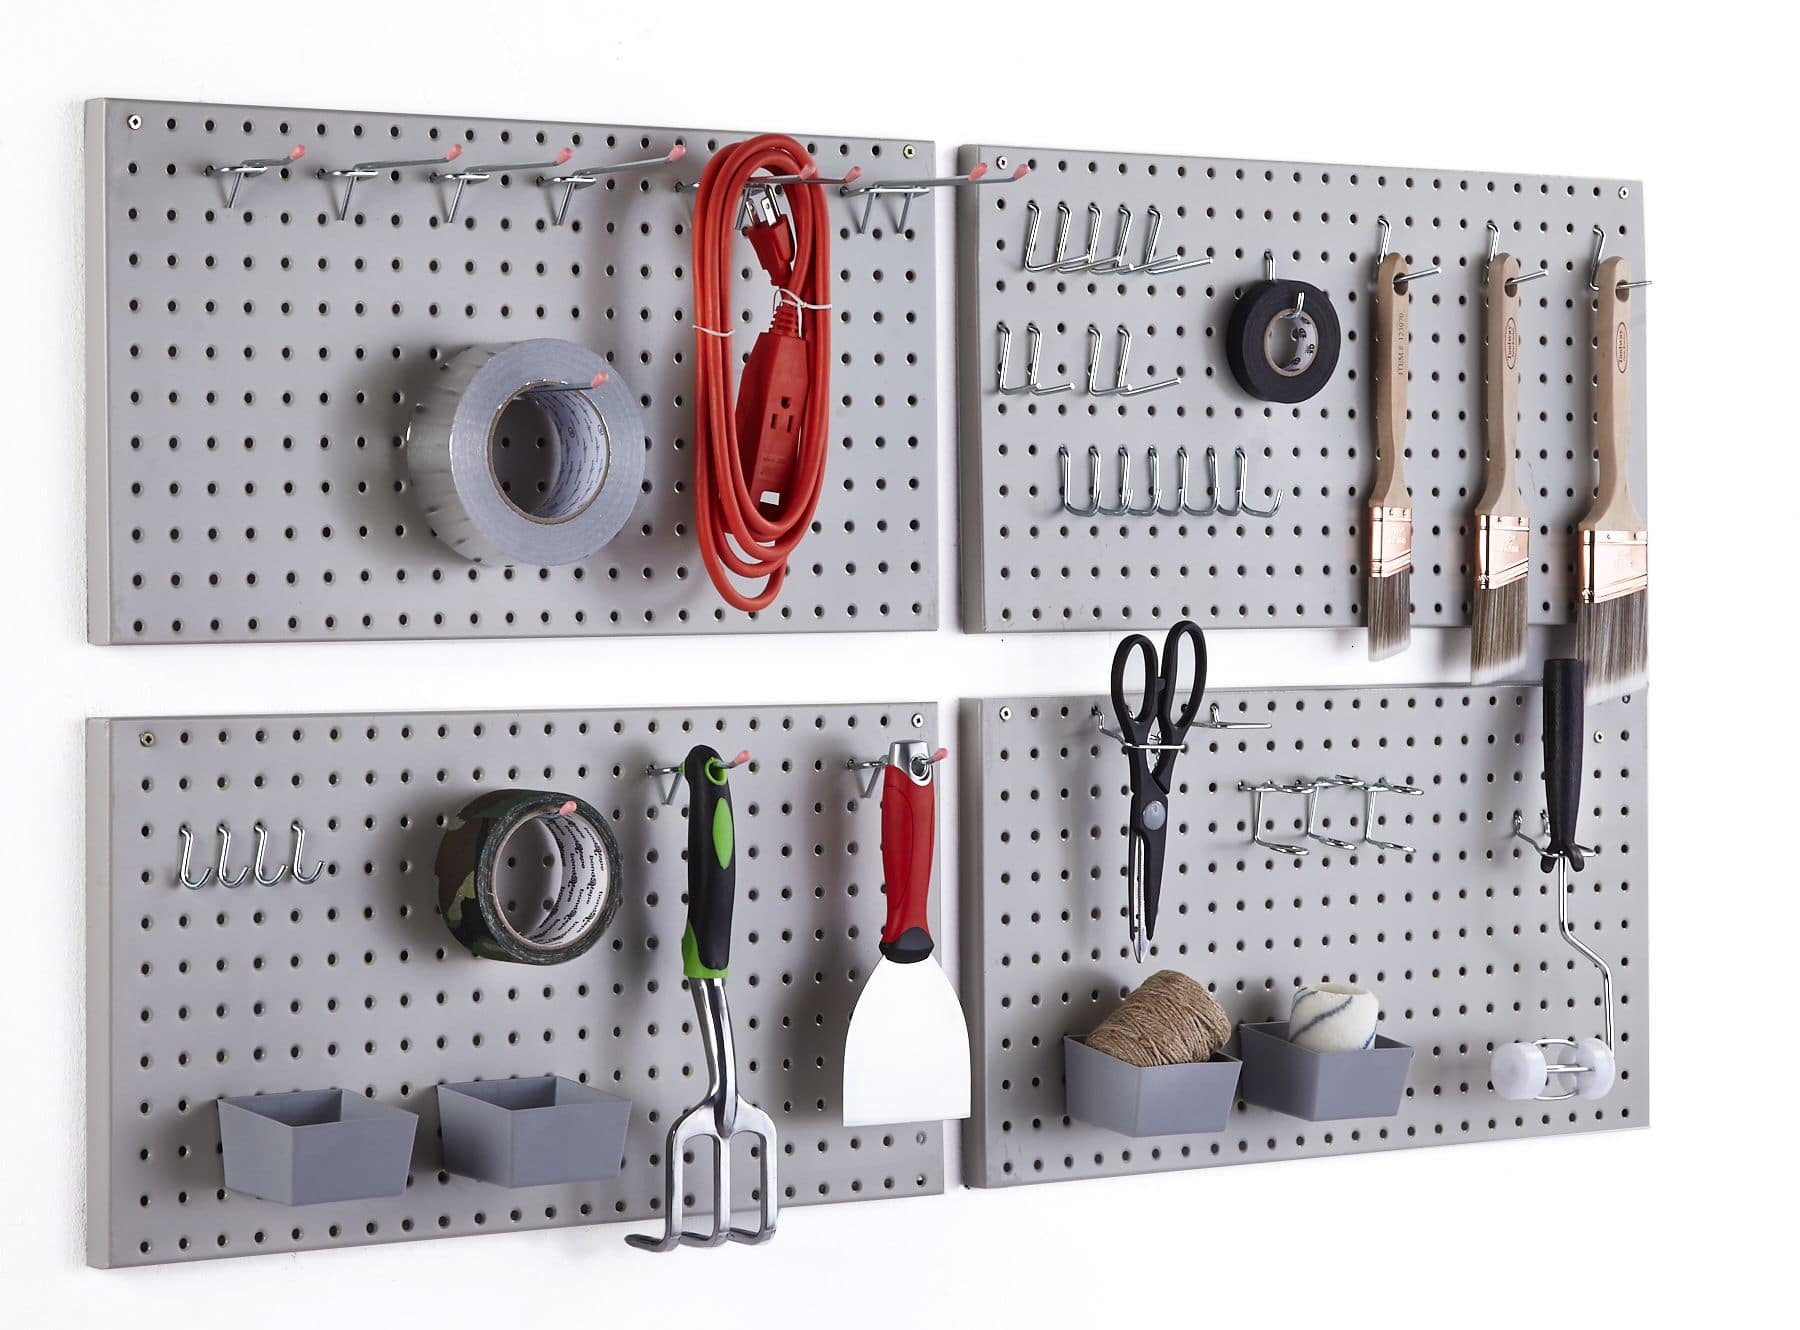 Mastercraft Steel Pegboard Kit, Includes Four 12x24-in Panels, 48-pc